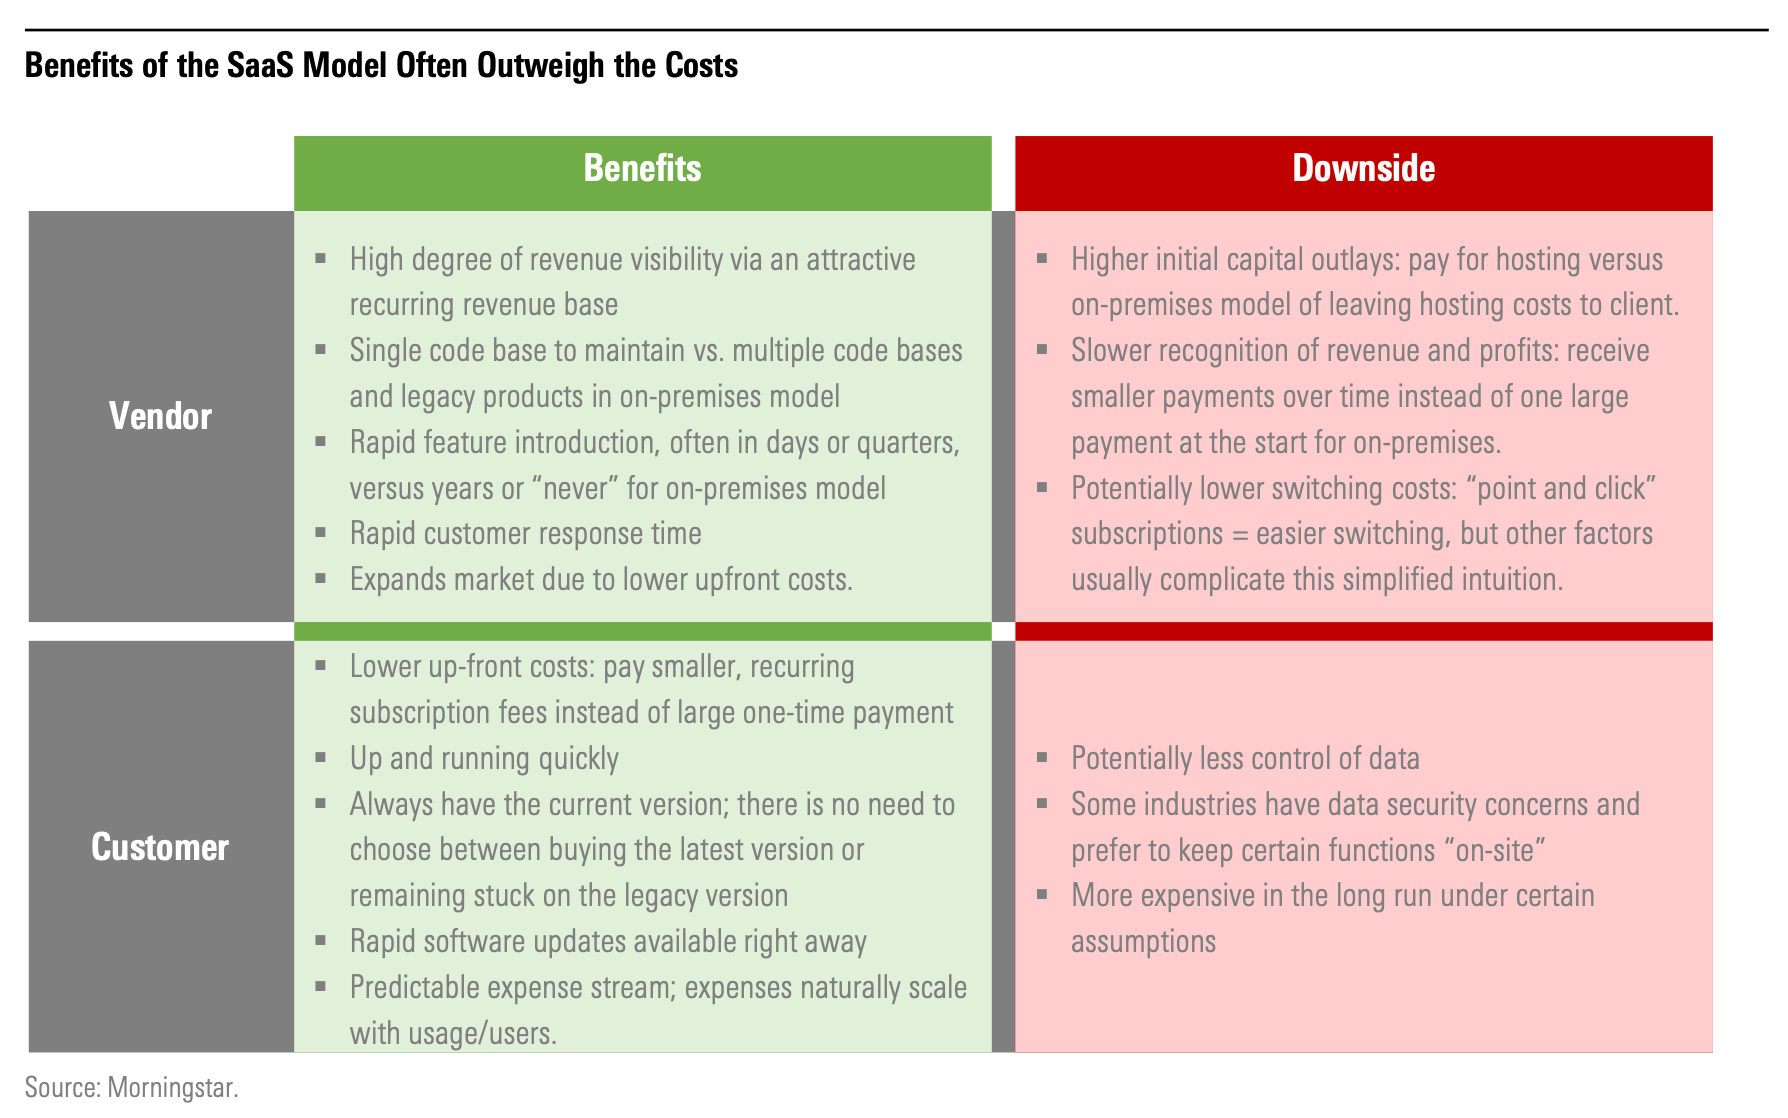 Diagram sharing the benefits and downsides of the SaaS model for a vendor and a customer.